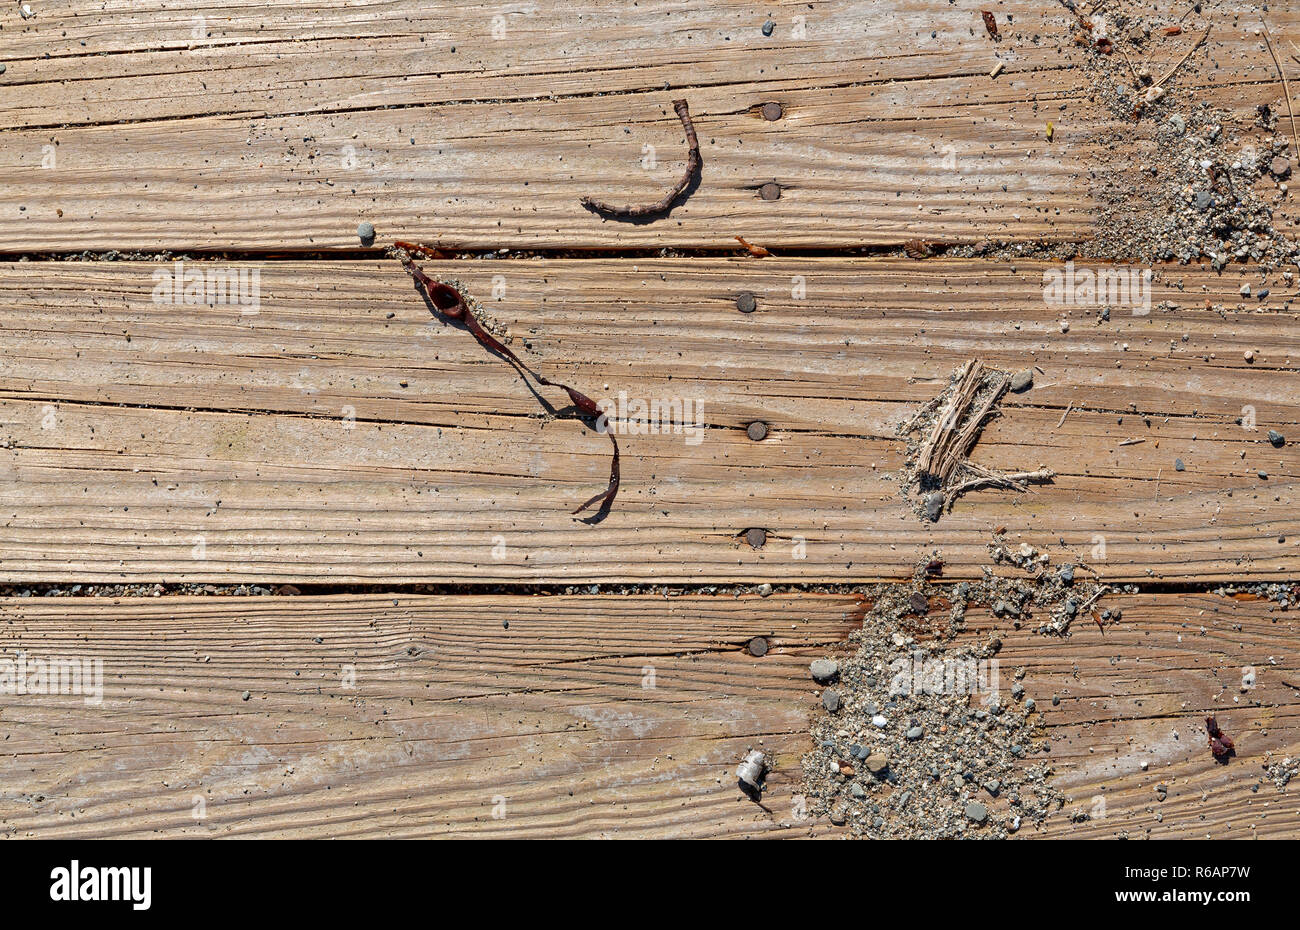 The surface of an old pressure treated walkway with sand gravel and seaweed on the boards. Stock Photo